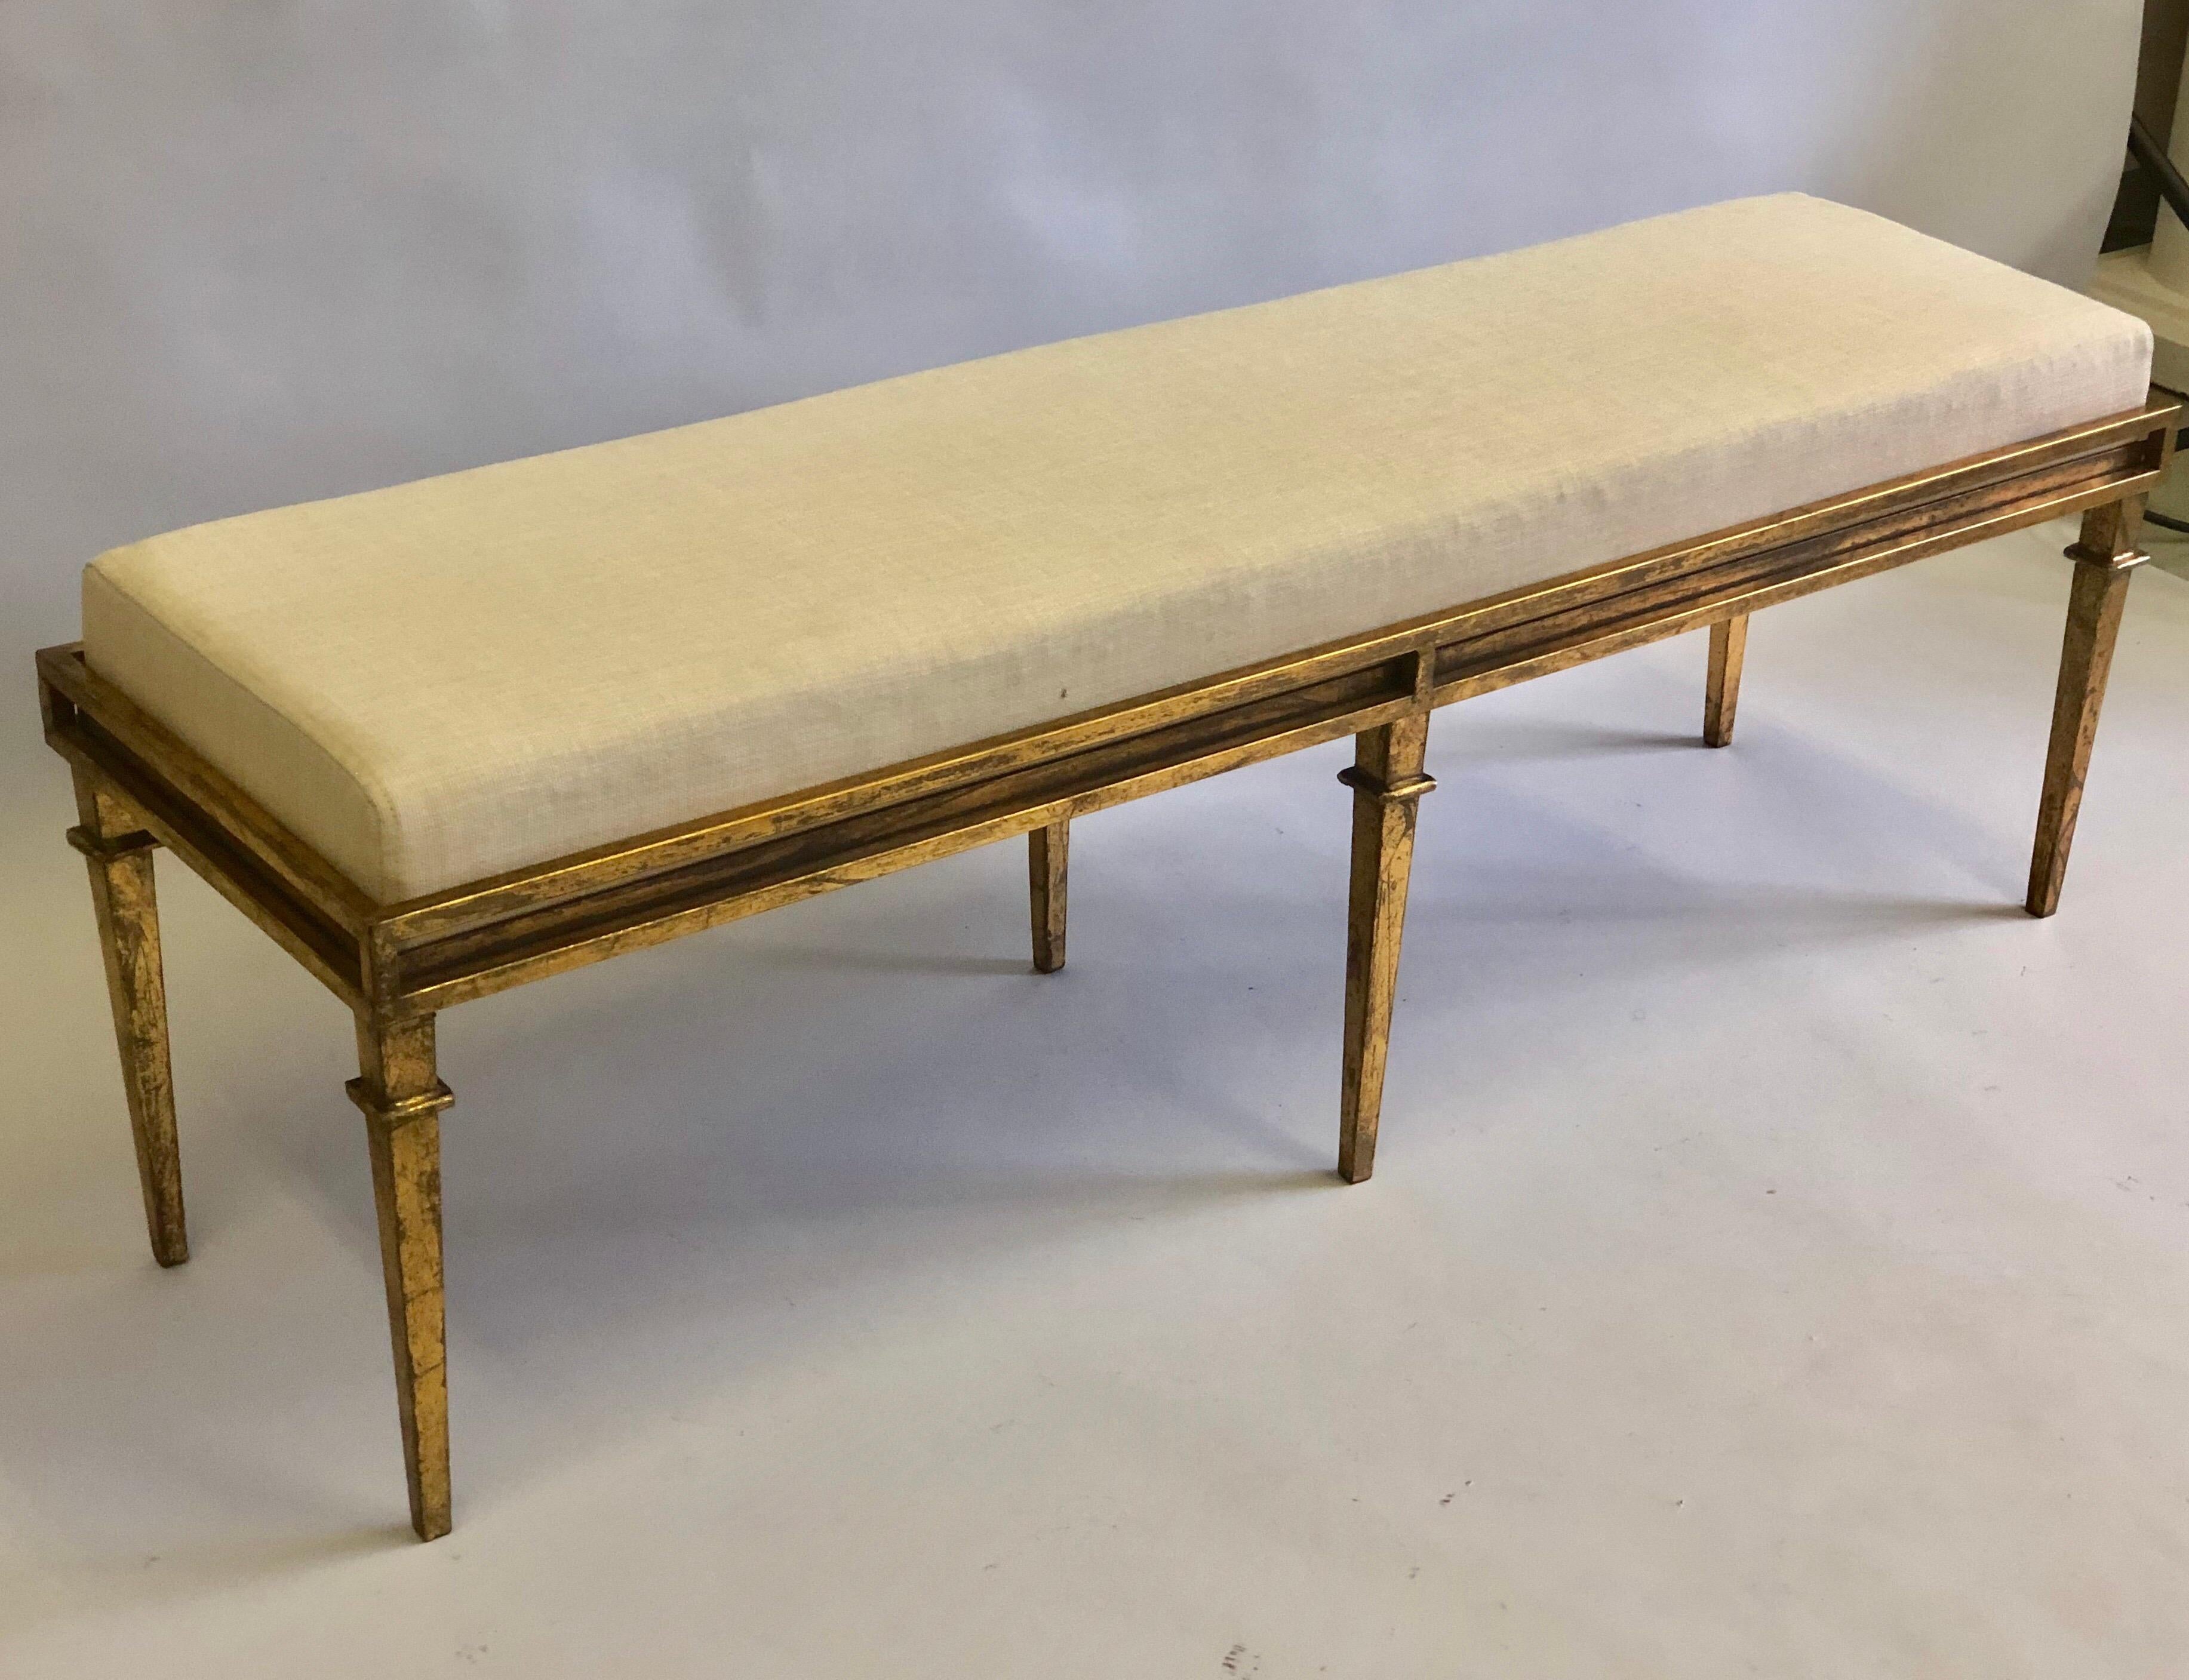 French Modern Neoclassical Gilt Iron Bench in the style of Maison Ramsay In Good Condition For Sale In New York, NY